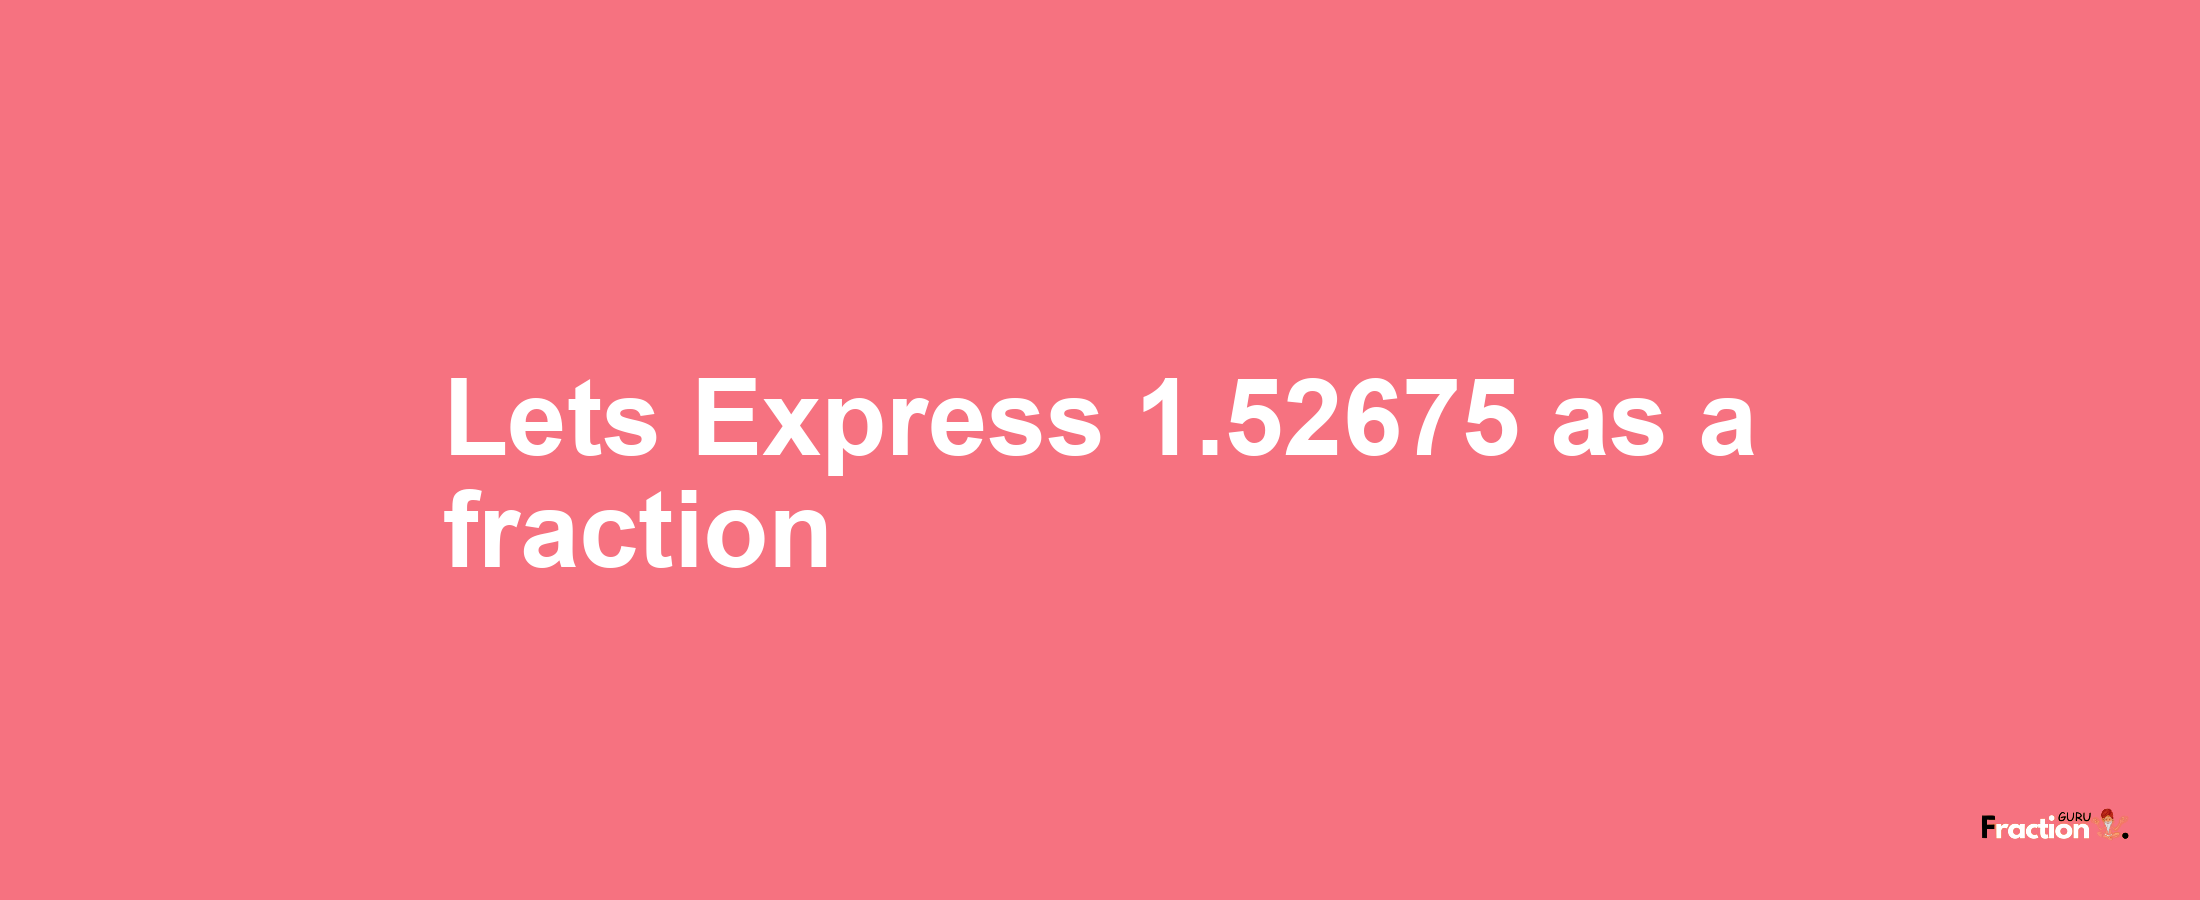 Lets Express 1.52675 as afraction